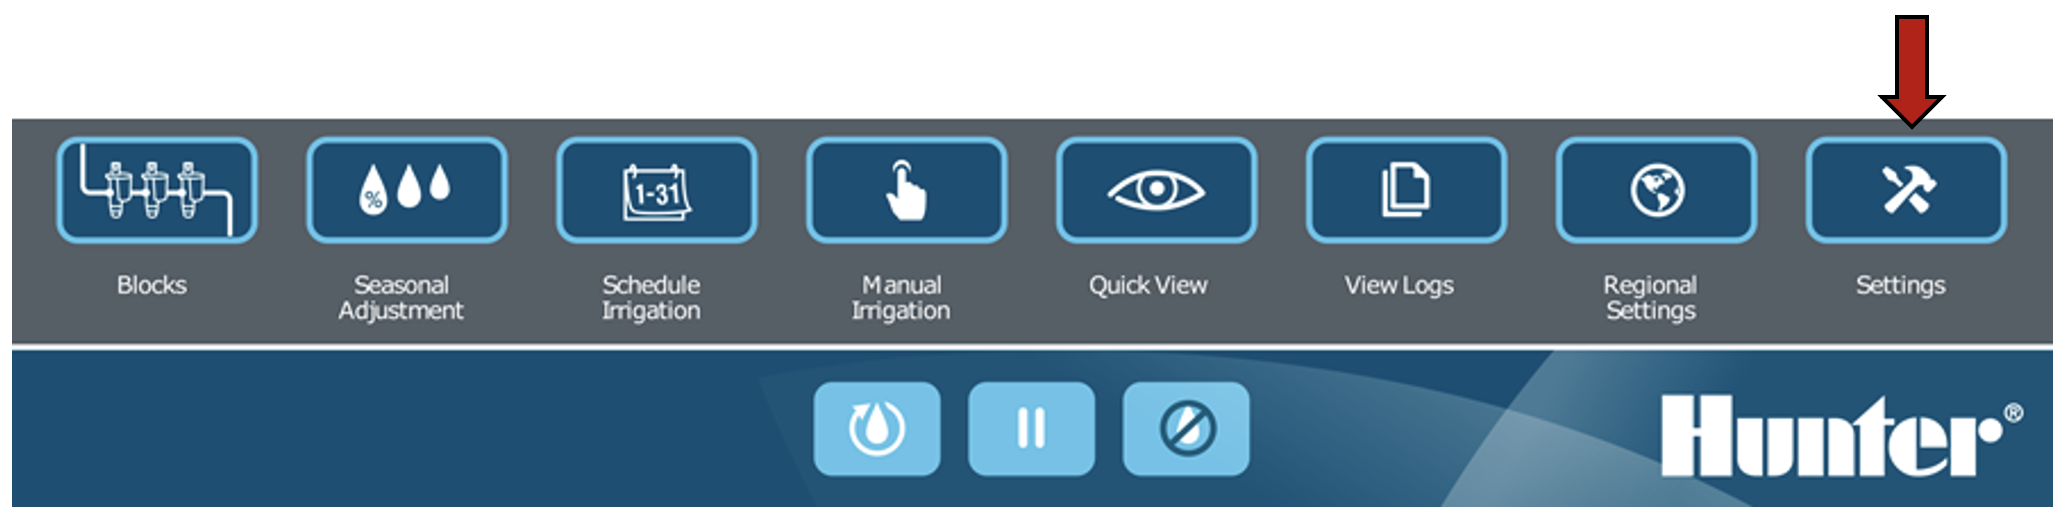 Image of the button interface with the settings button highlighted.